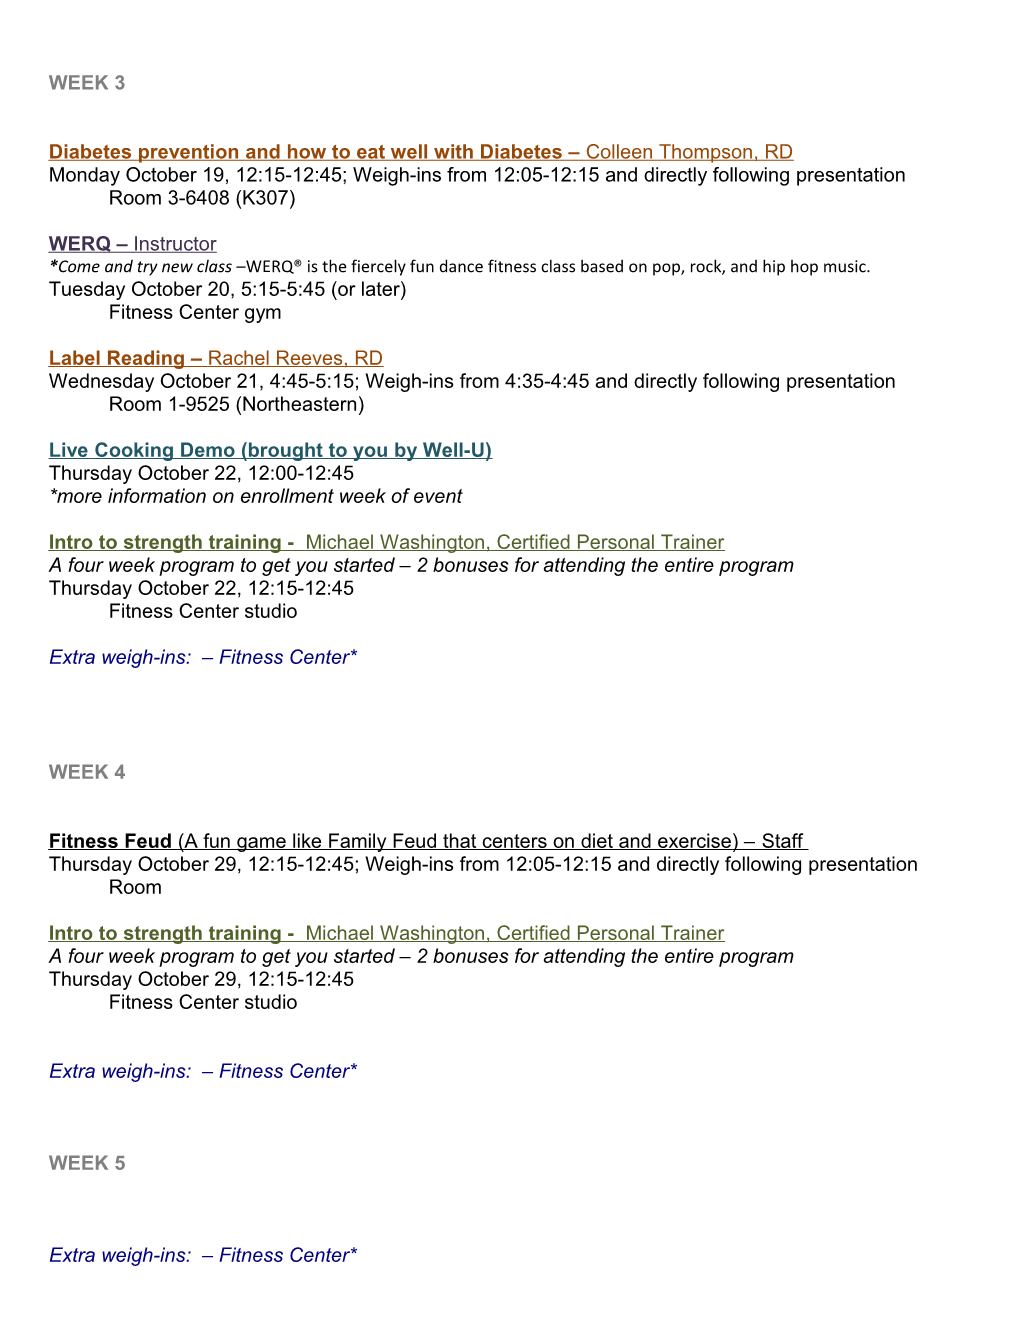 Awlr Fall 2015 - Session Schedule